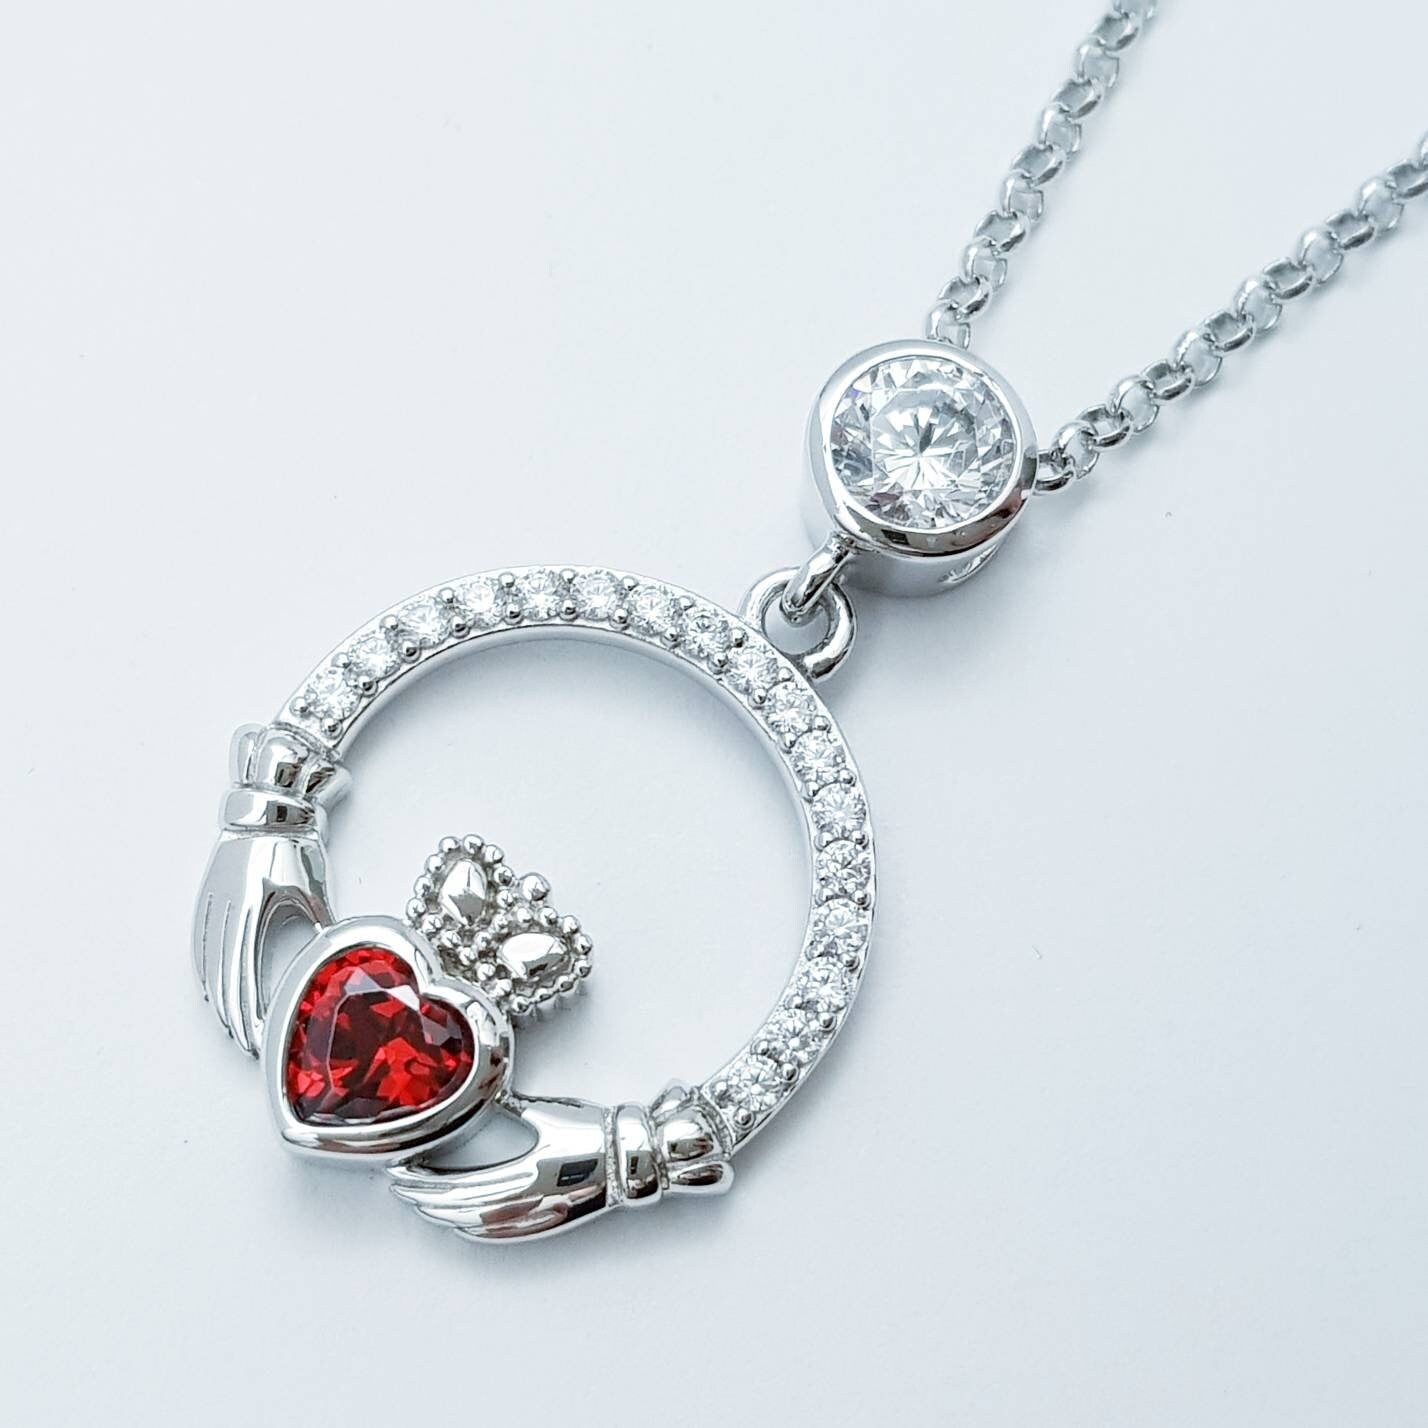 Sterling silver claddagh necklace  with red garnet heart shaped stone, January birthstone